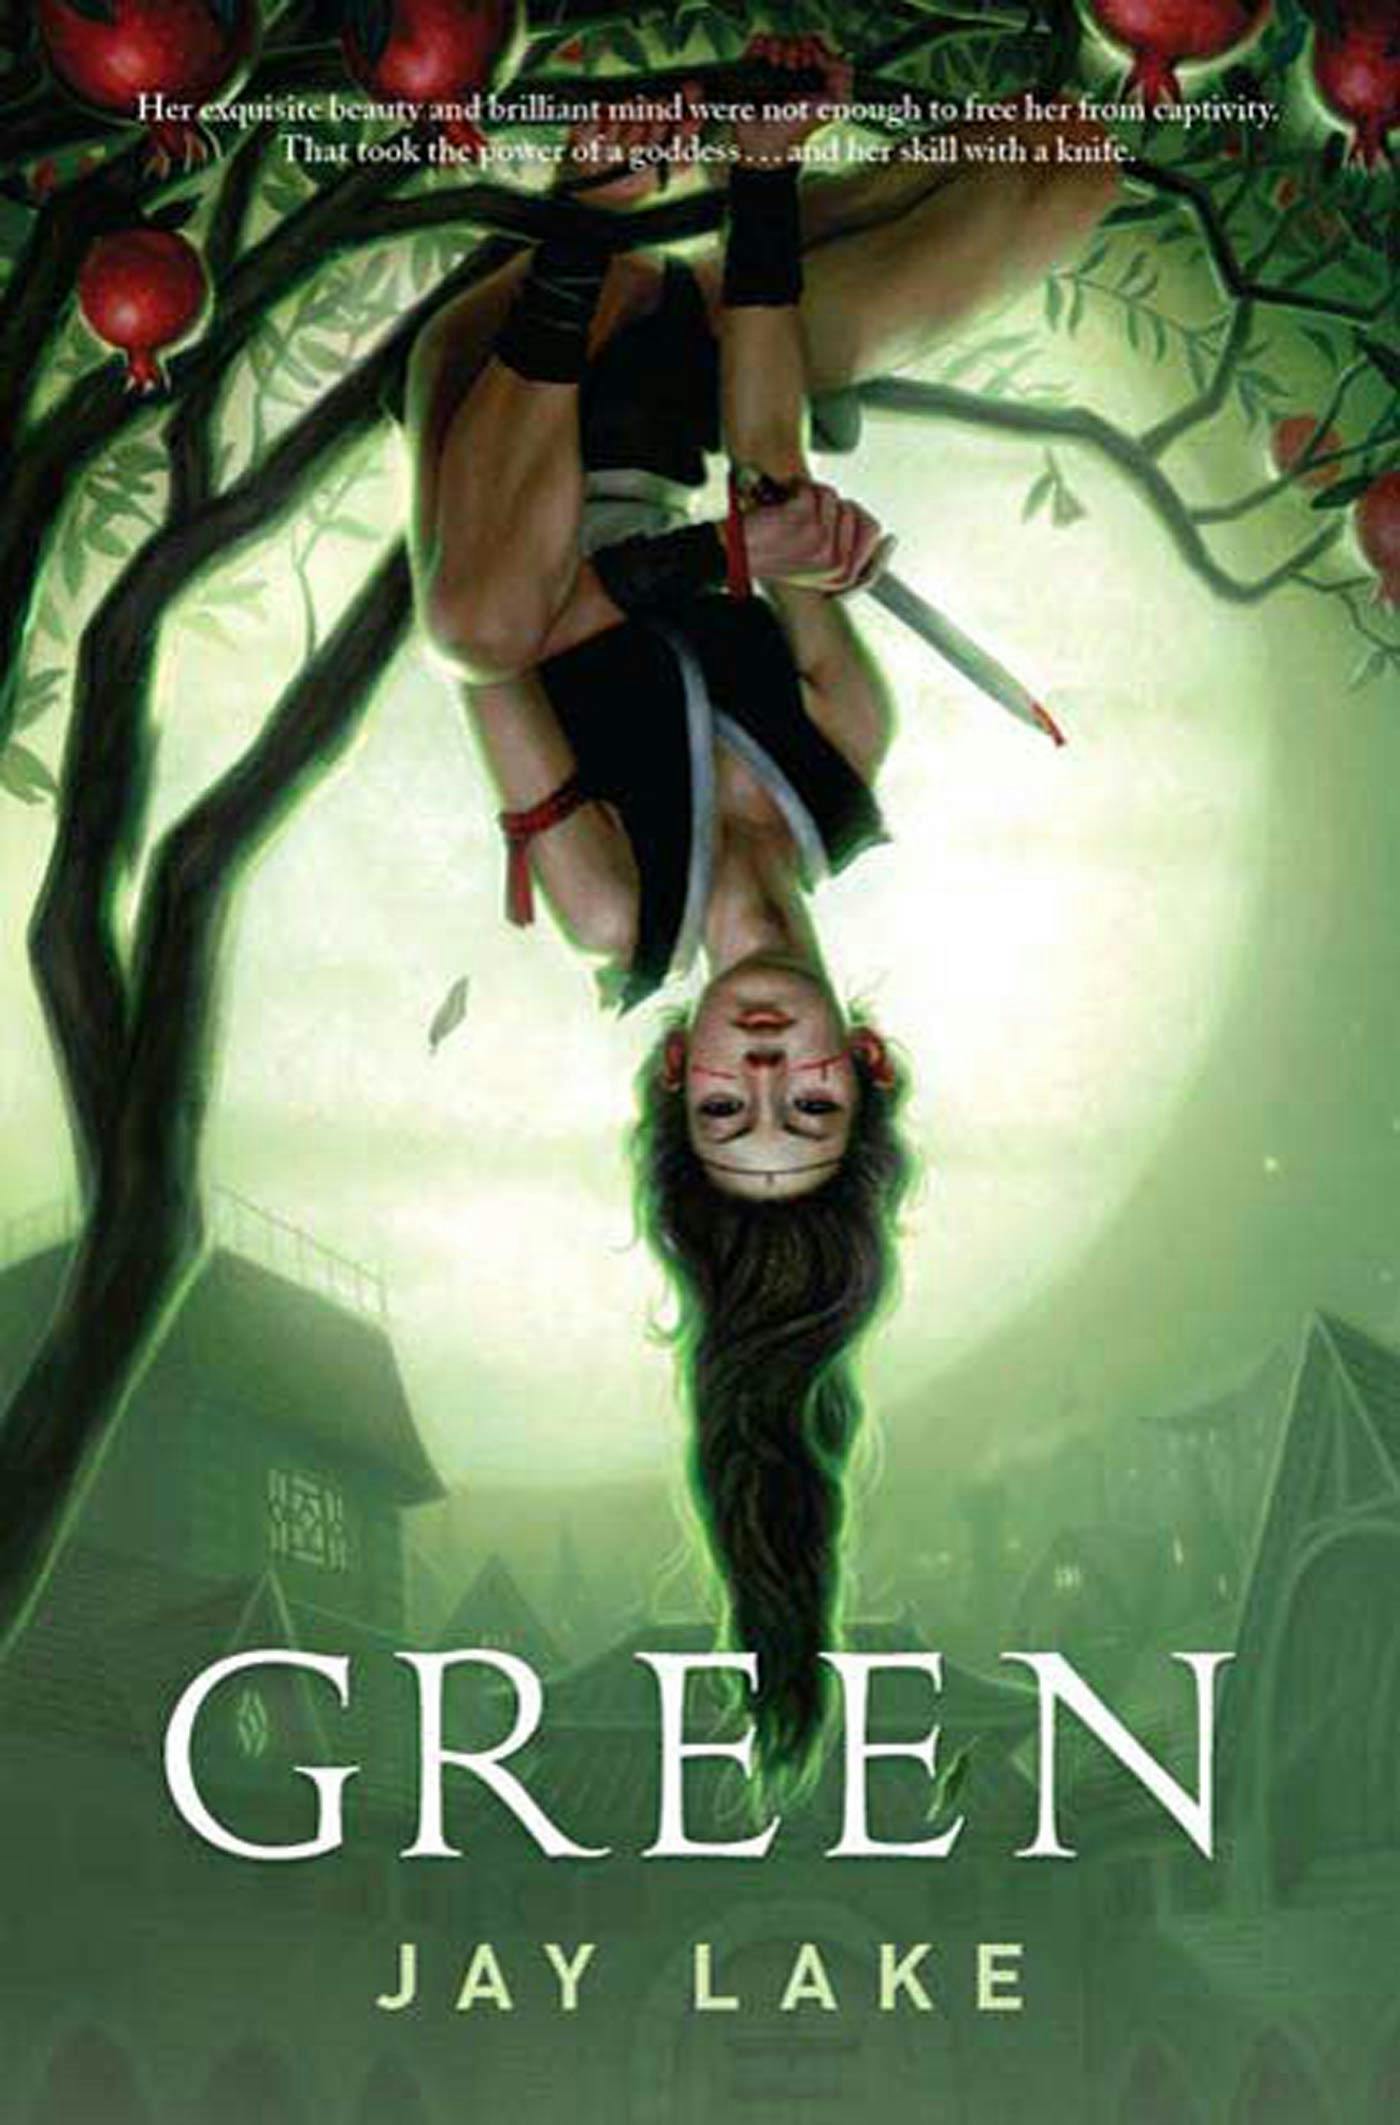 Cover for the book titled as: Green